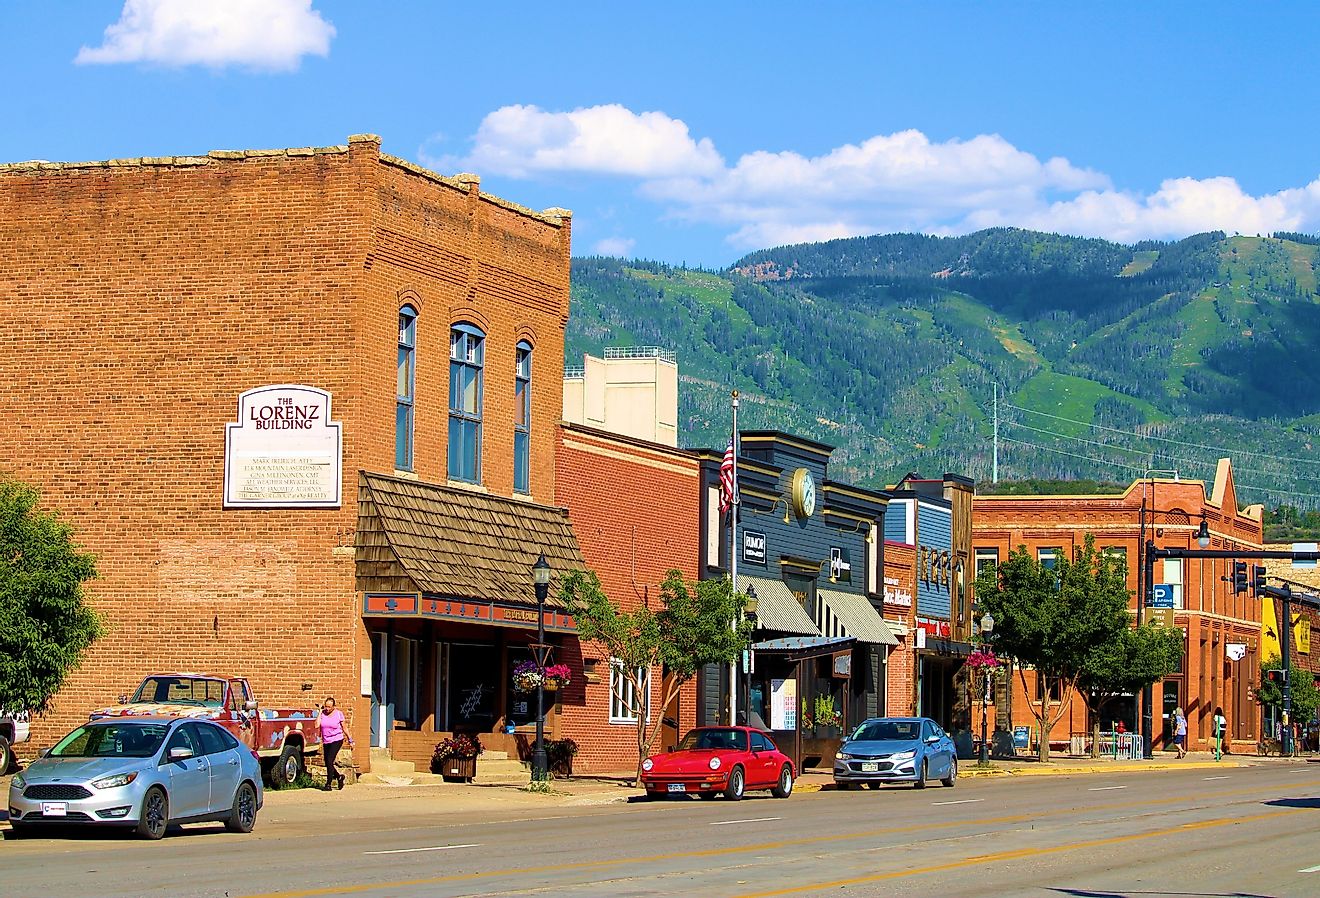 Vintage brick buildings with the ski resort on the mountains beyond taken in Steamboat Springs, Colorado. Image credit photojohn830 via Shutterstock